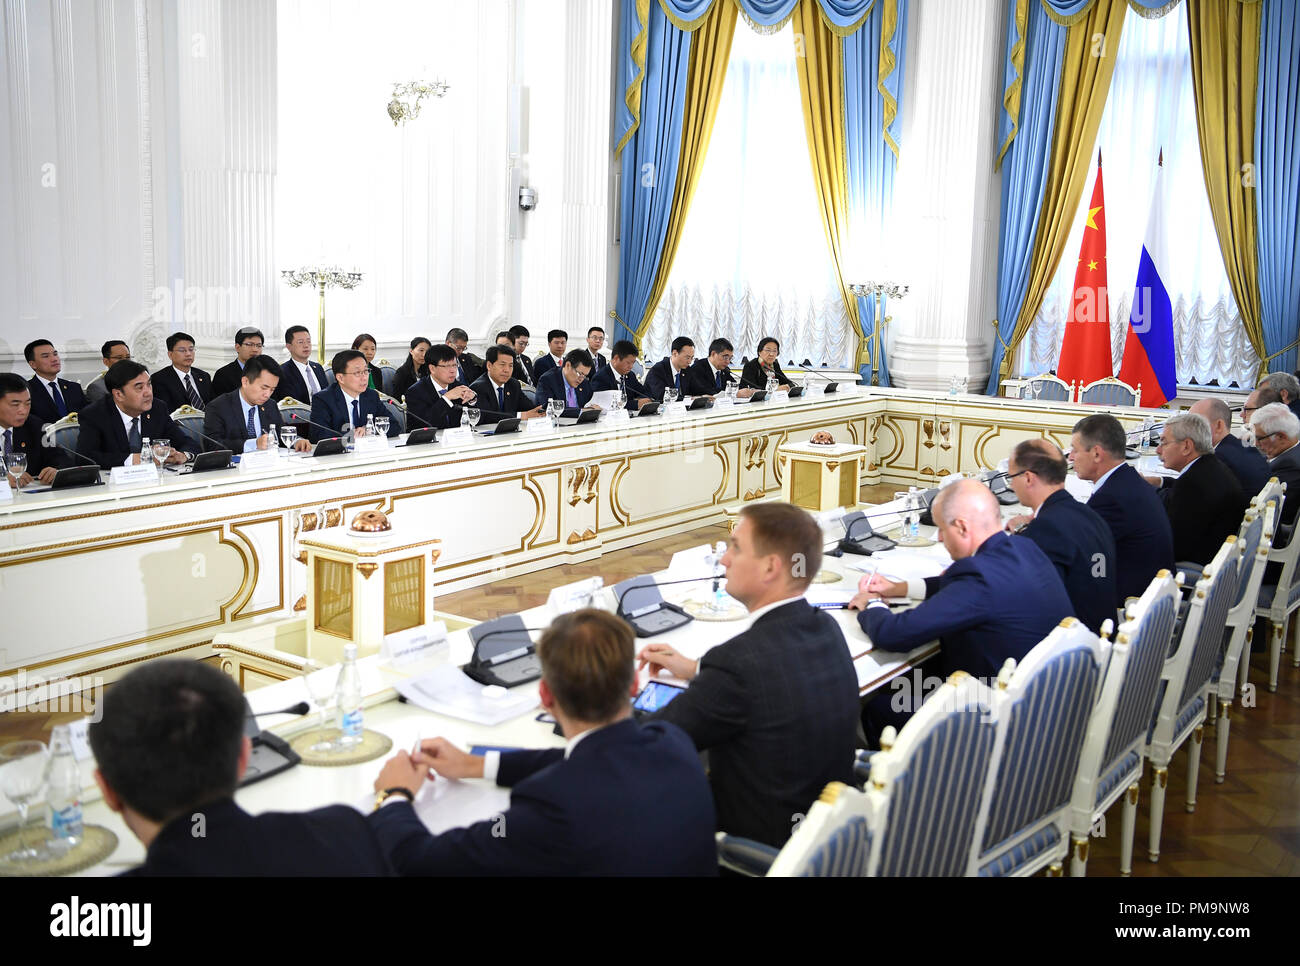 Moscow, Russia. 17th Sep, 2018. Chinese Vice Premier Han Zheng, also a member of the Standing Committee of the Political Bureau of the Communist Party of China (CPC) Central Committee, meets with Russian Deputy Prime Minister Dmitry Kozak in Moscow, Russia, Sept. 17, 2018. Han and Kozak co-chaired the 15th meeting of the China-Russia Energy Cooperation Committee in Moscow on Monday. Credit: Yan Yan/Xinhua/Alamy Live News Stock Photo